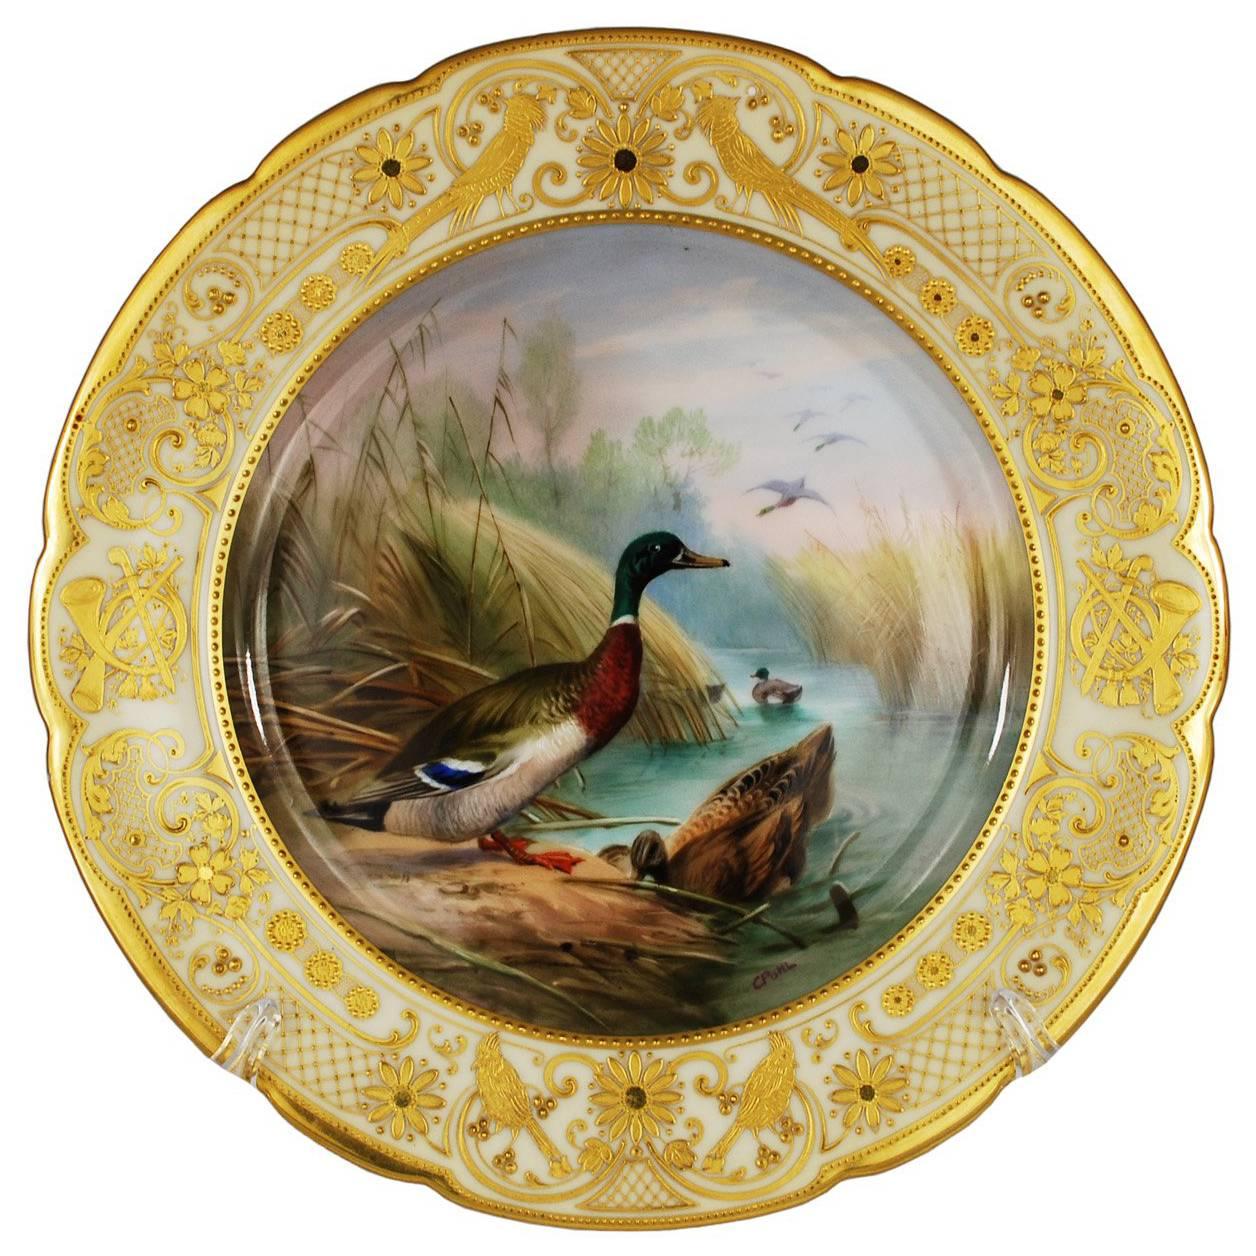 Antique Cabinet Game Bird Plate Hand-Painted Gilt Attributed to Lamm Studio